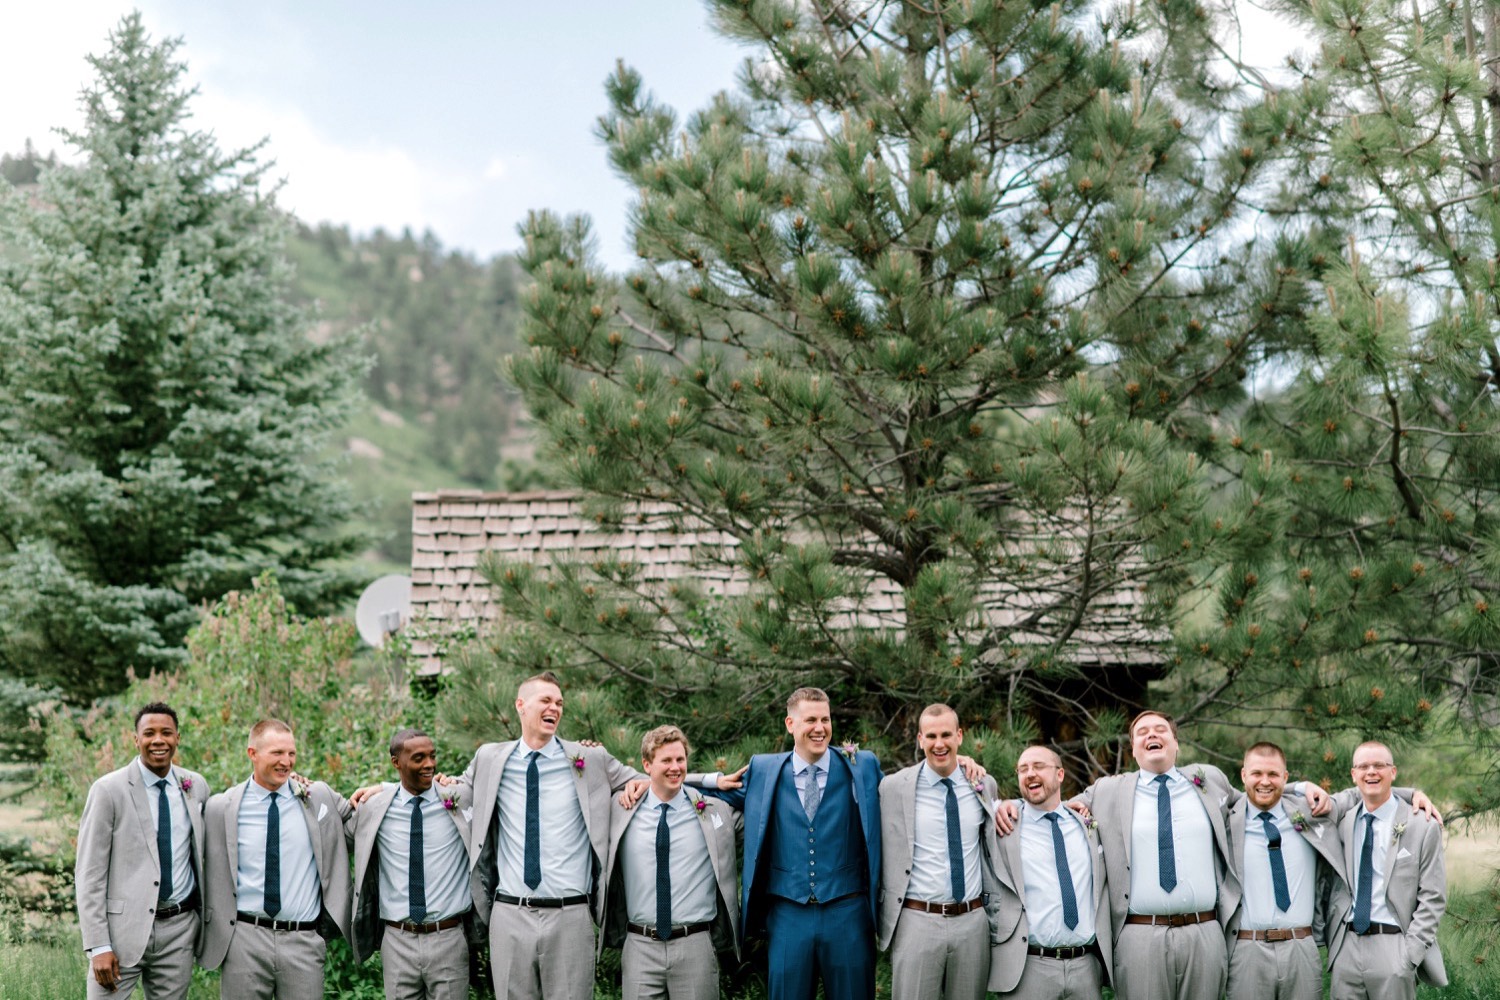 Charlton surrounded by his groomsmen poses for portraits outside Spruce Mountain Ranch in Larkspur, Colorado.